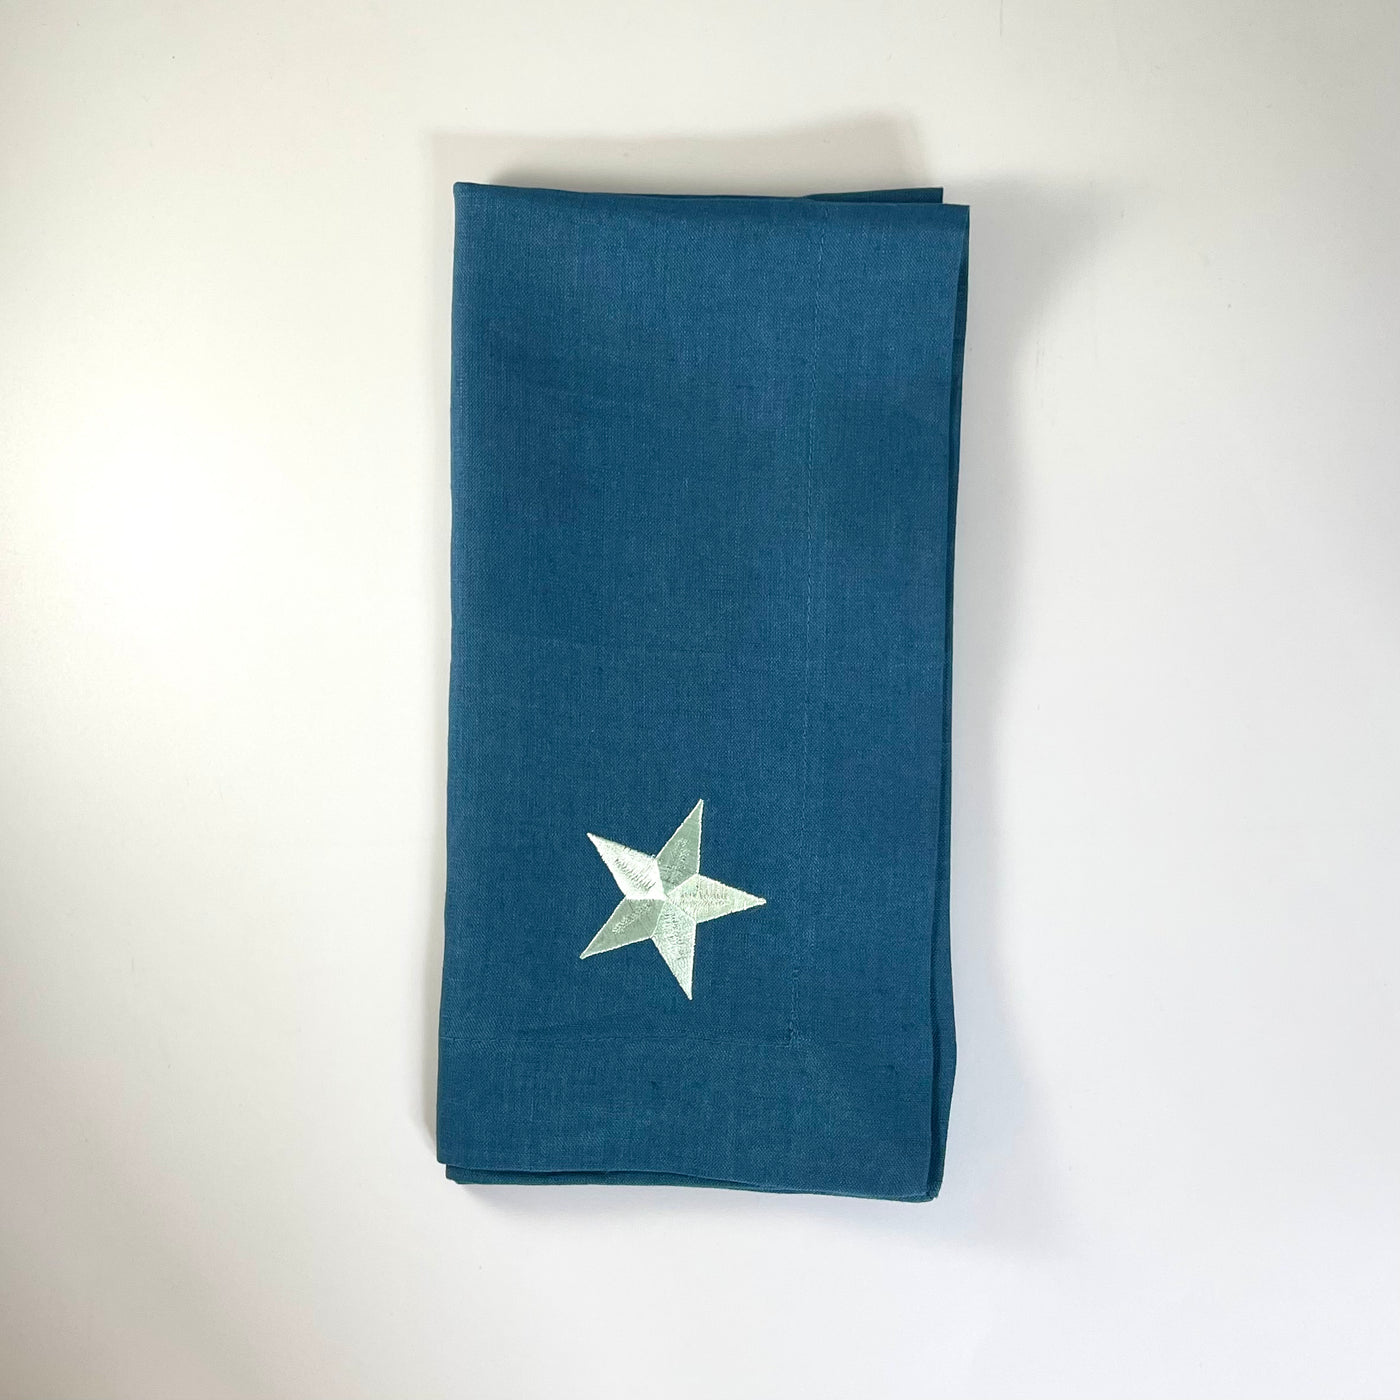 Teal and Pale Blue Linen Napkin with Embroidered Star